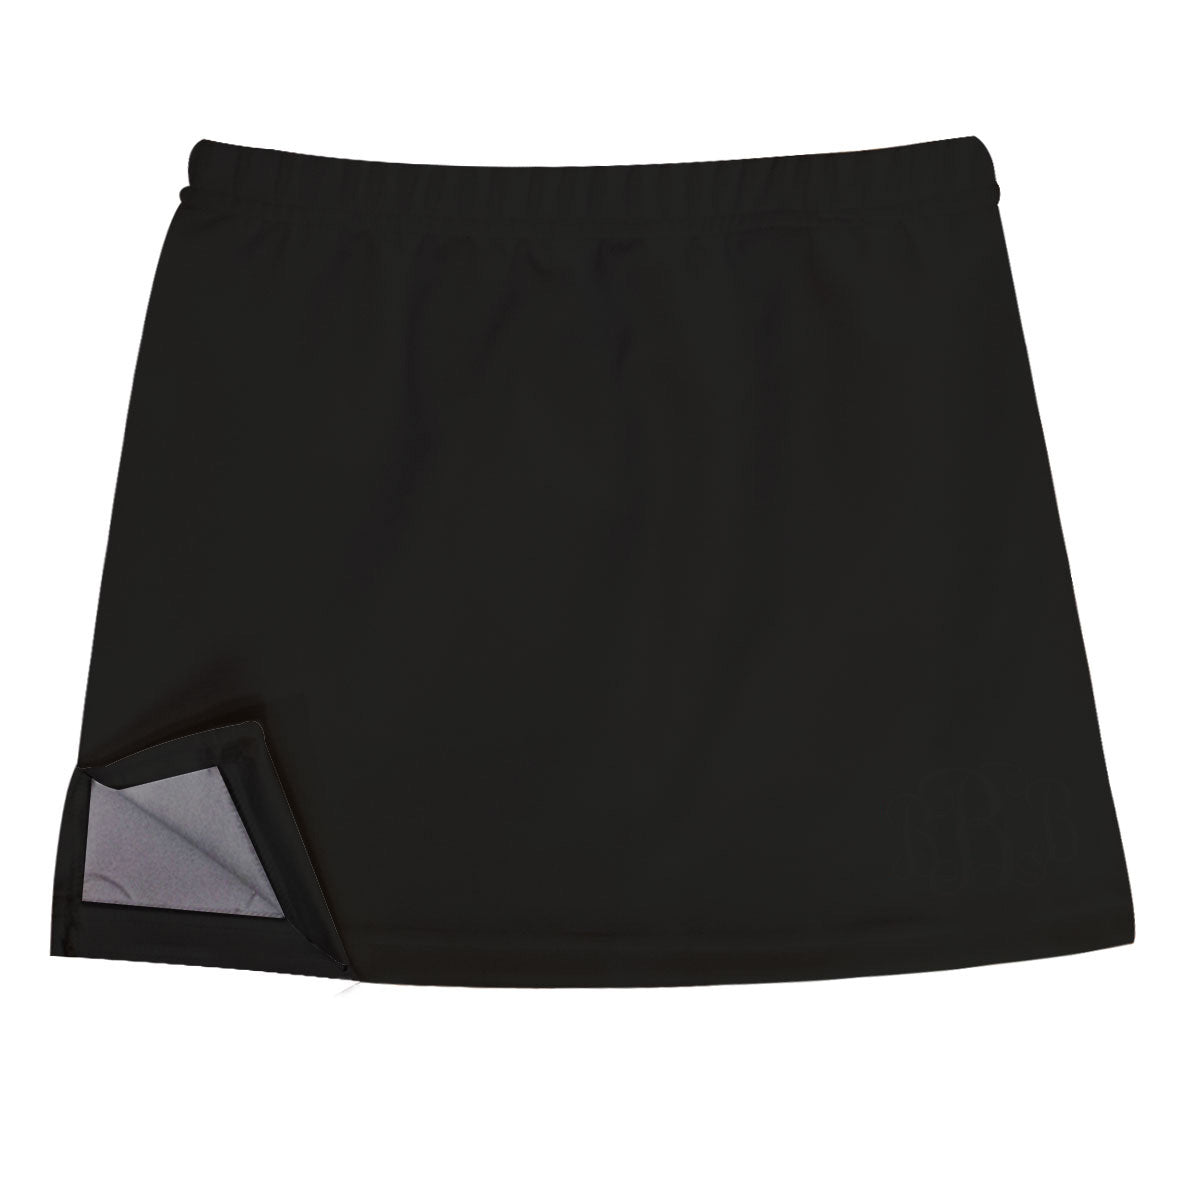 Monogram Black Skirt With Side Vents - Wimziy&Co.